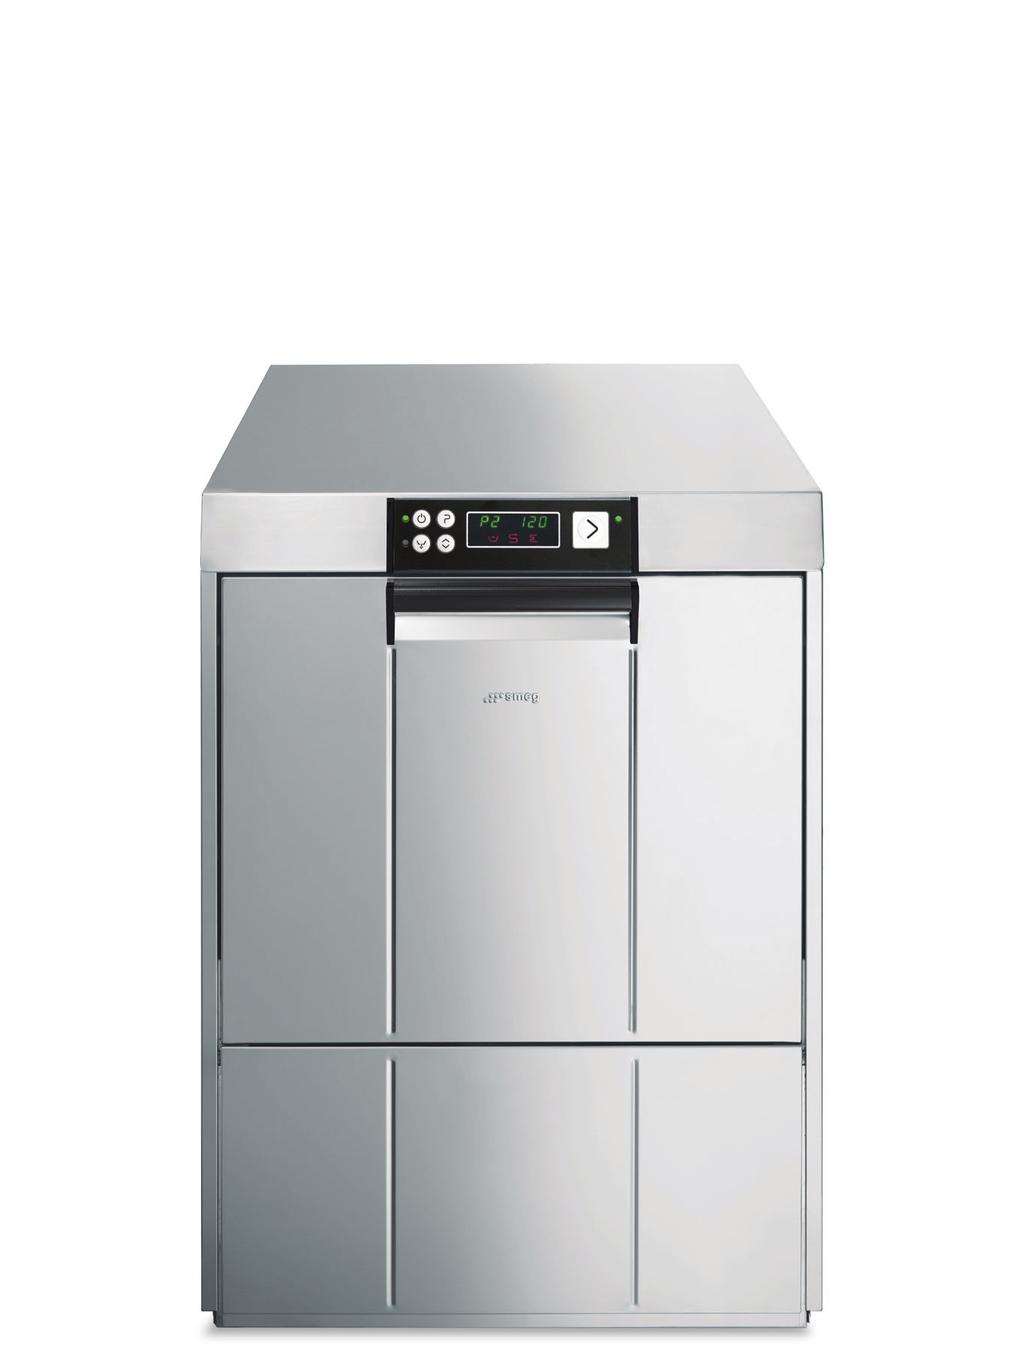 TOP PERFORMANCE AND SAVING CONSUMPTION EFFICIENCY Topline dishwashers have been designed for great performance in energy efficiency and water and detergent consumption.